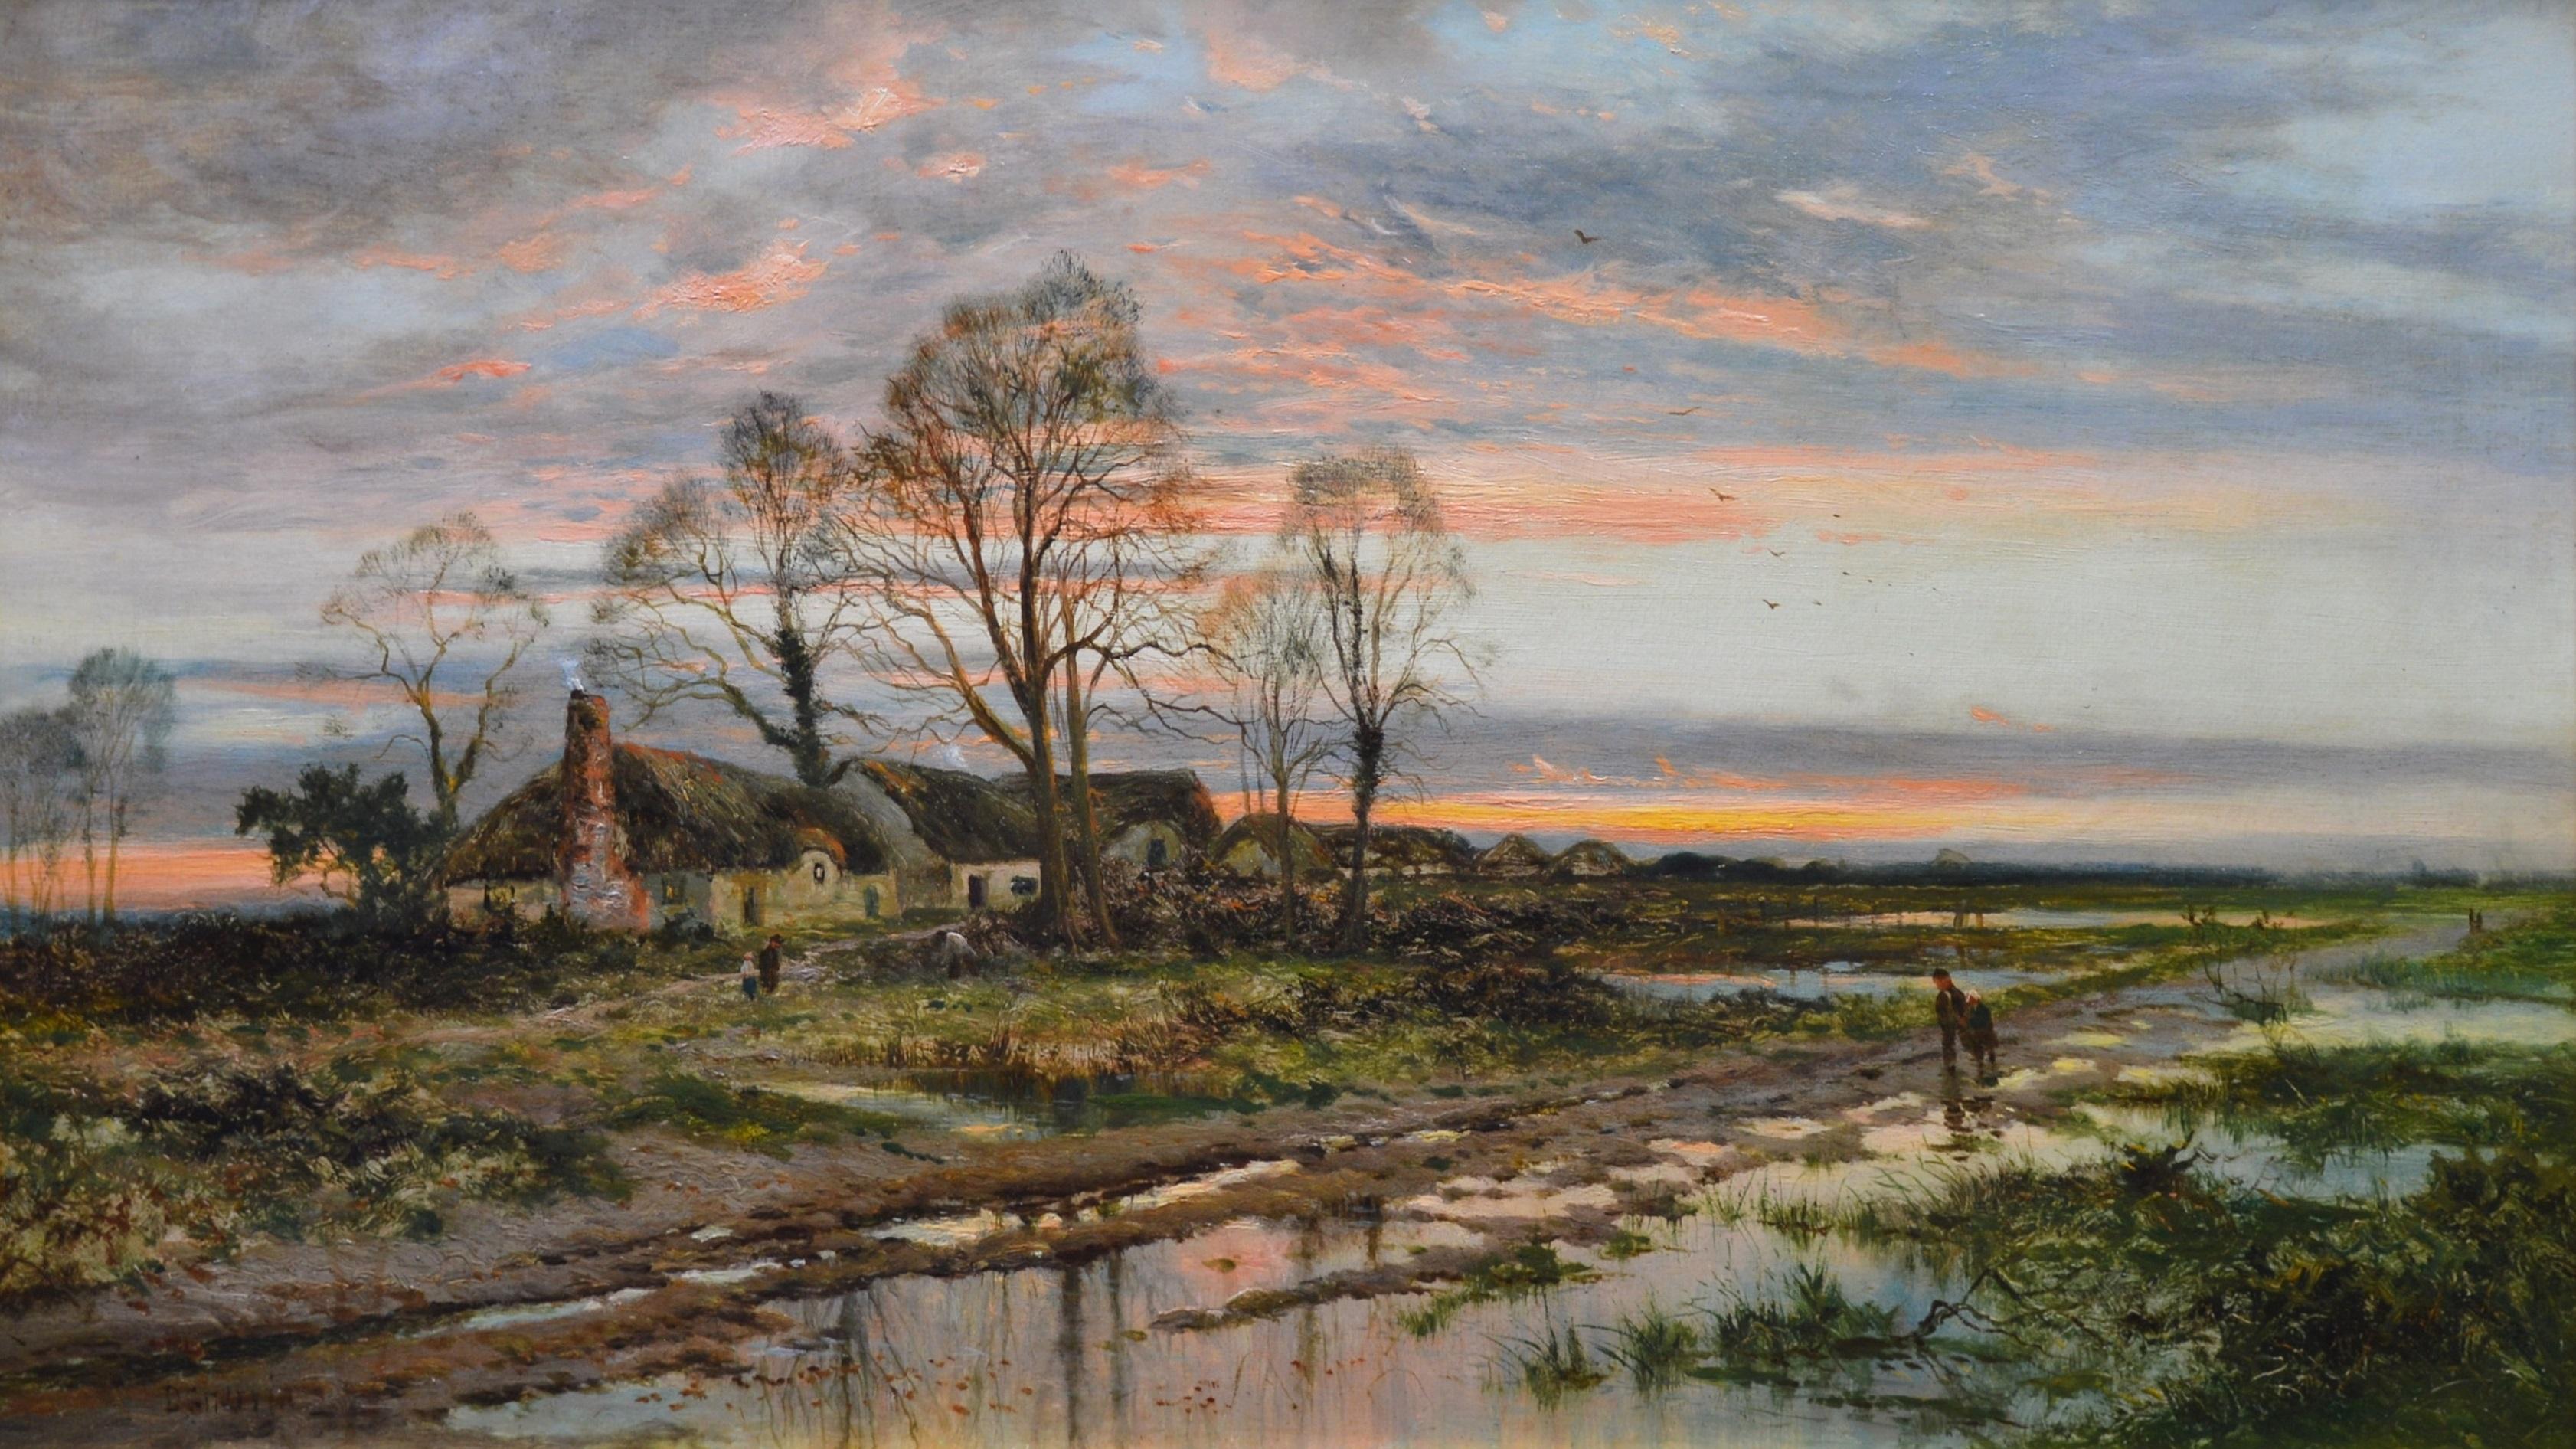 The Last Gleam, Kempsey Common - 19th Century Sunset Landscape Oil Painting - Brown Figurative Painting by Daniel Sherrin